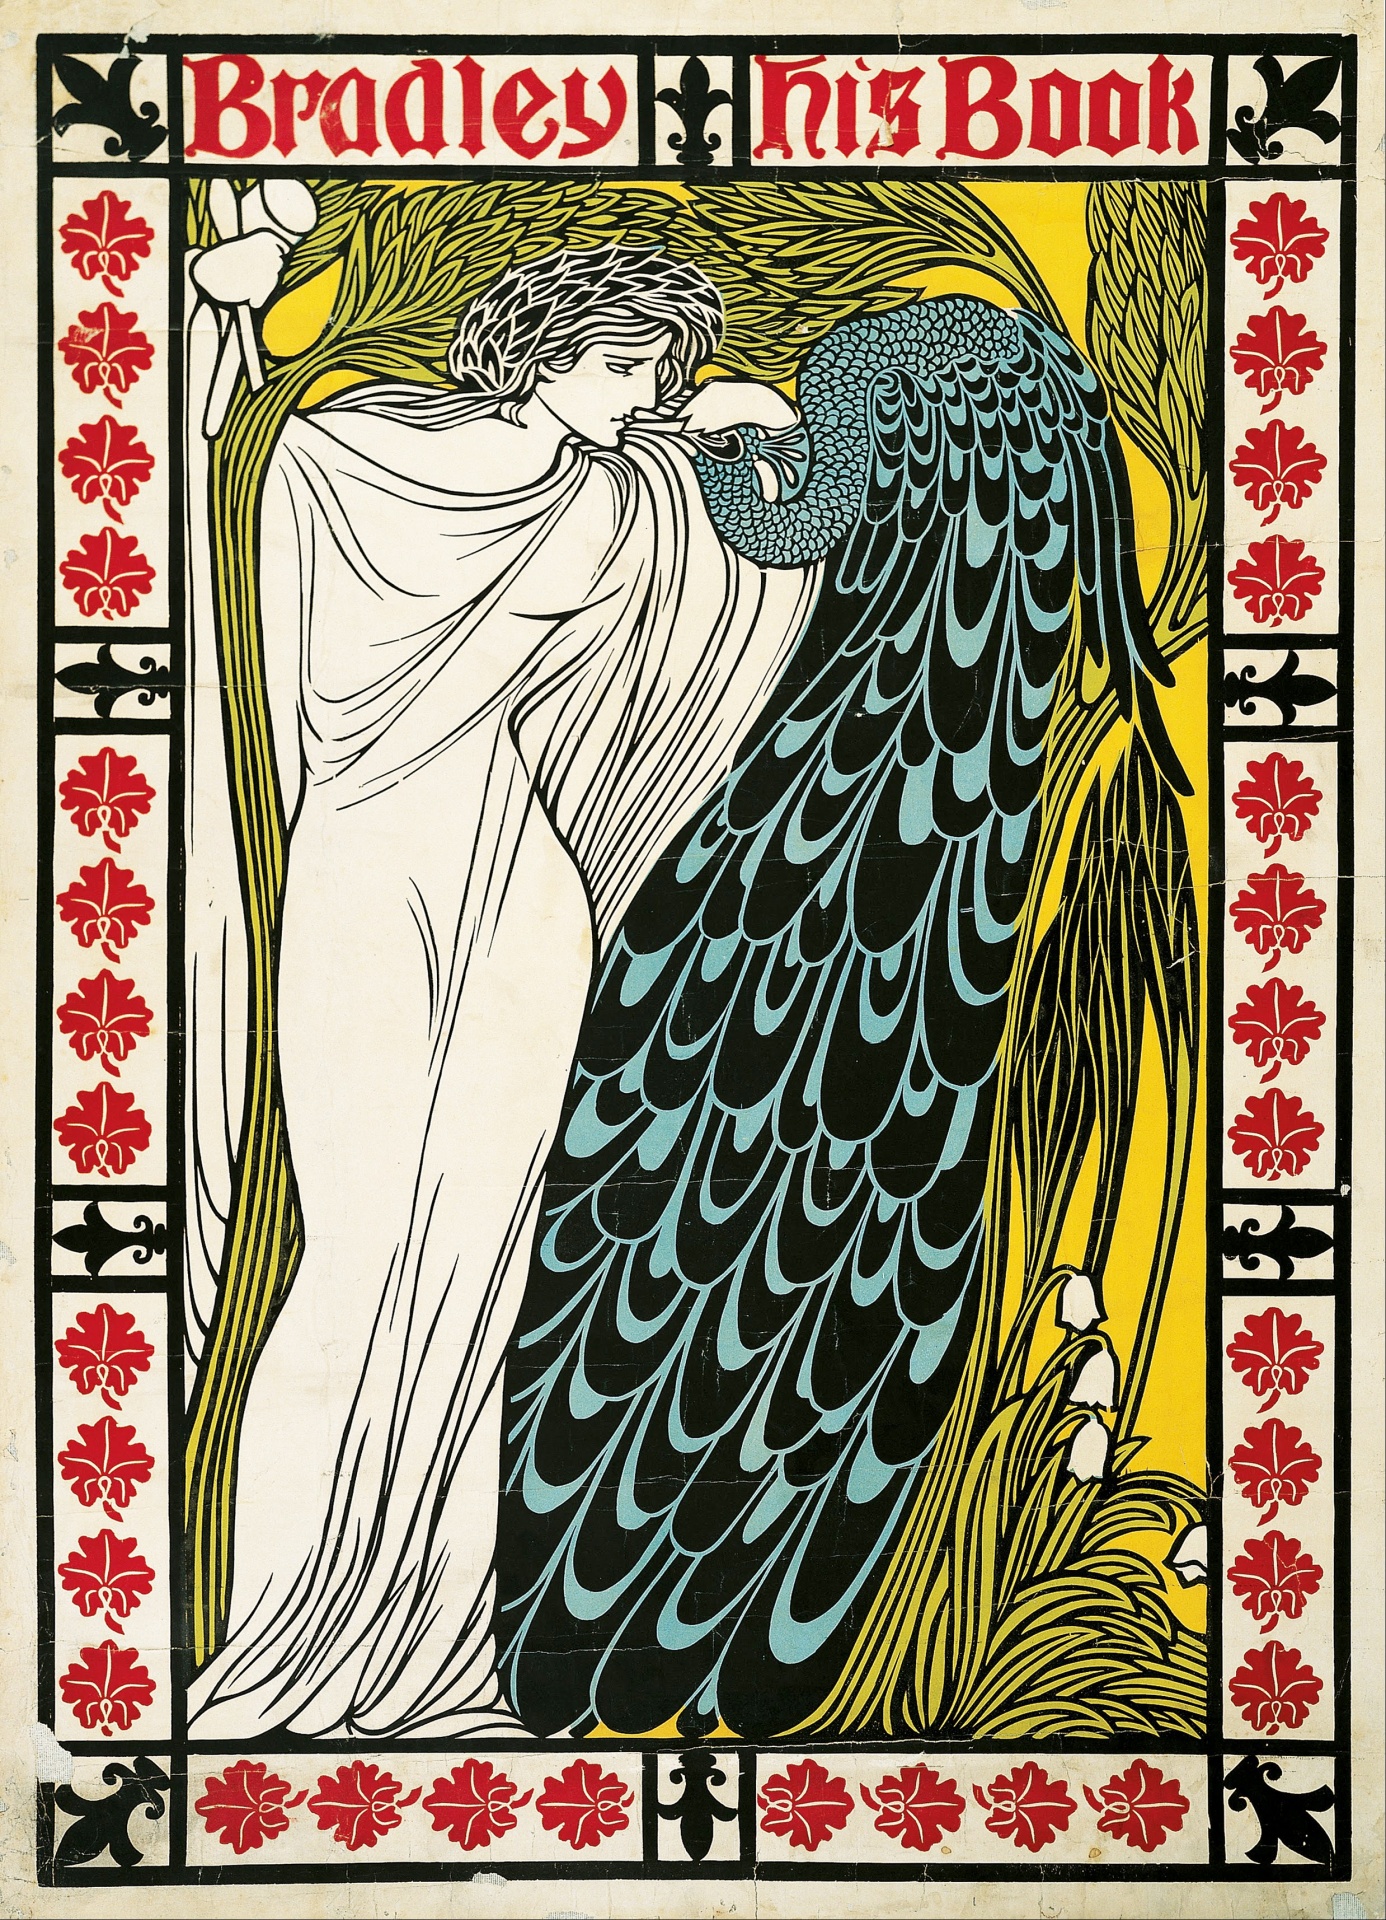 Vintage art deco poster, print of woman and peacock